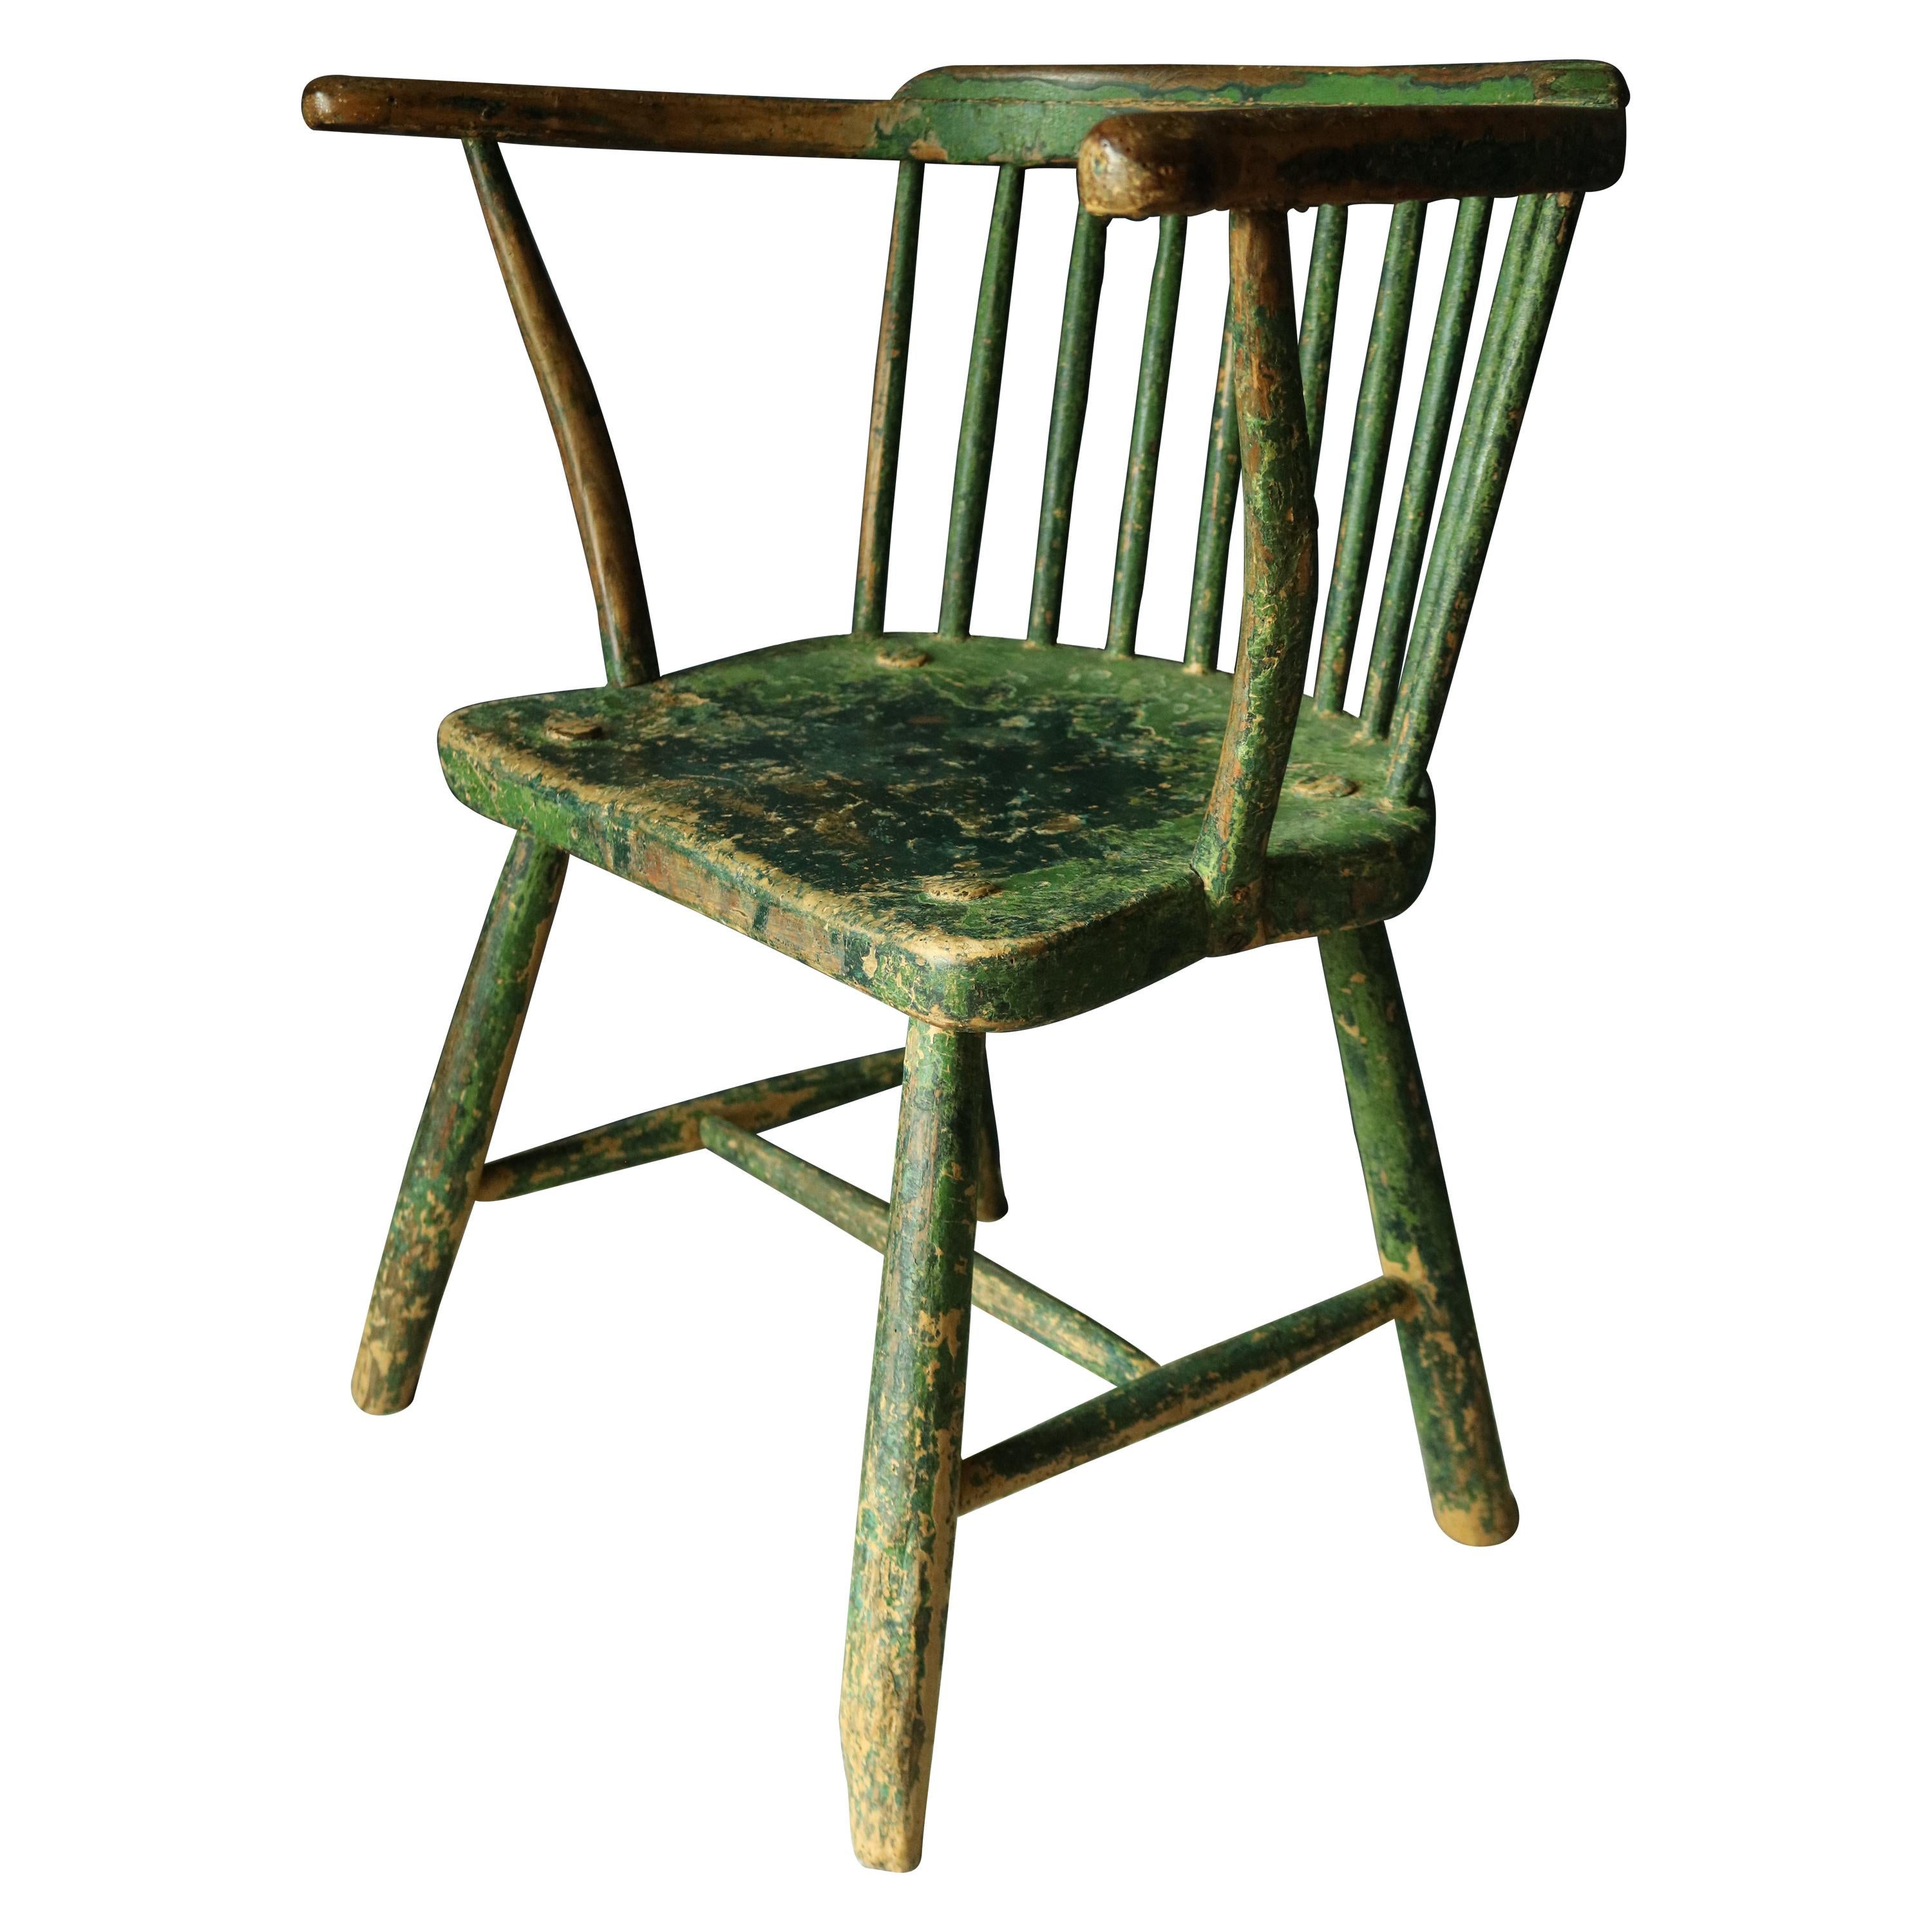 A truly wonderful early 19th century painted Welsh stick chair, from Cardiganshire region of South Wales.